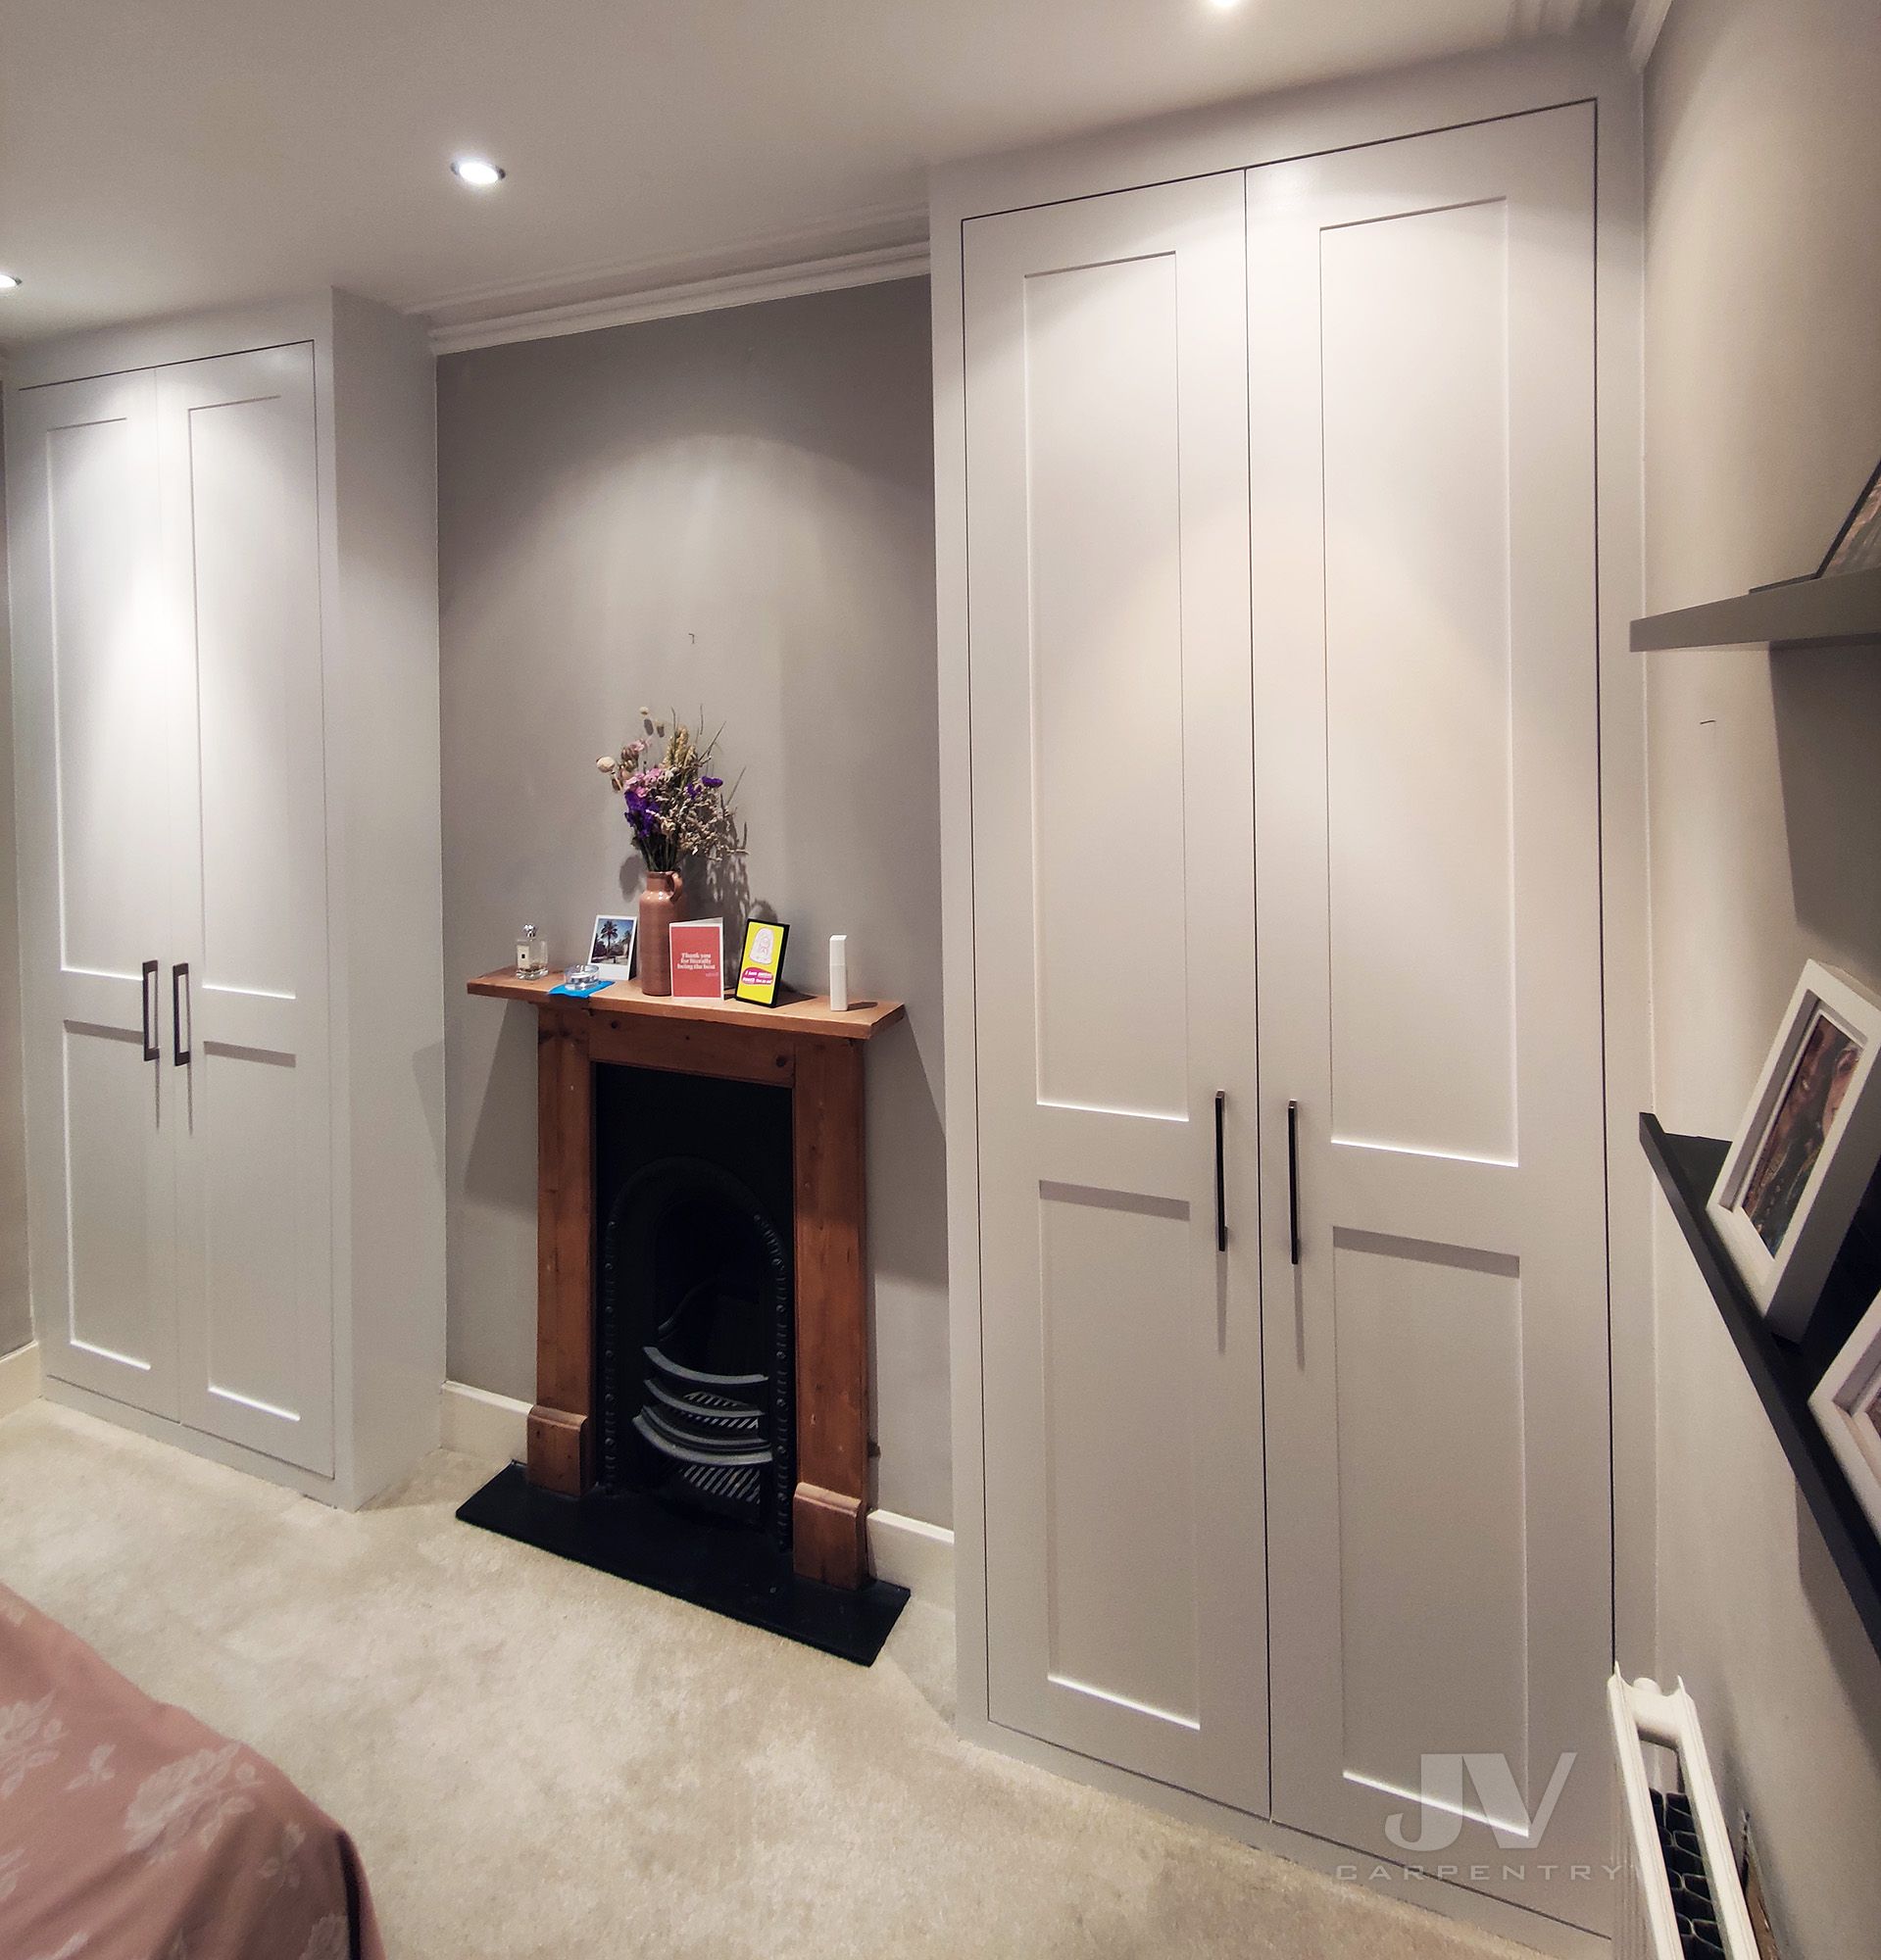 Alcove Wardrobes On Either Side Of The Chimney | London | Jv Carpentry Throughout Alcove Wardrobes (View 5 of 15)